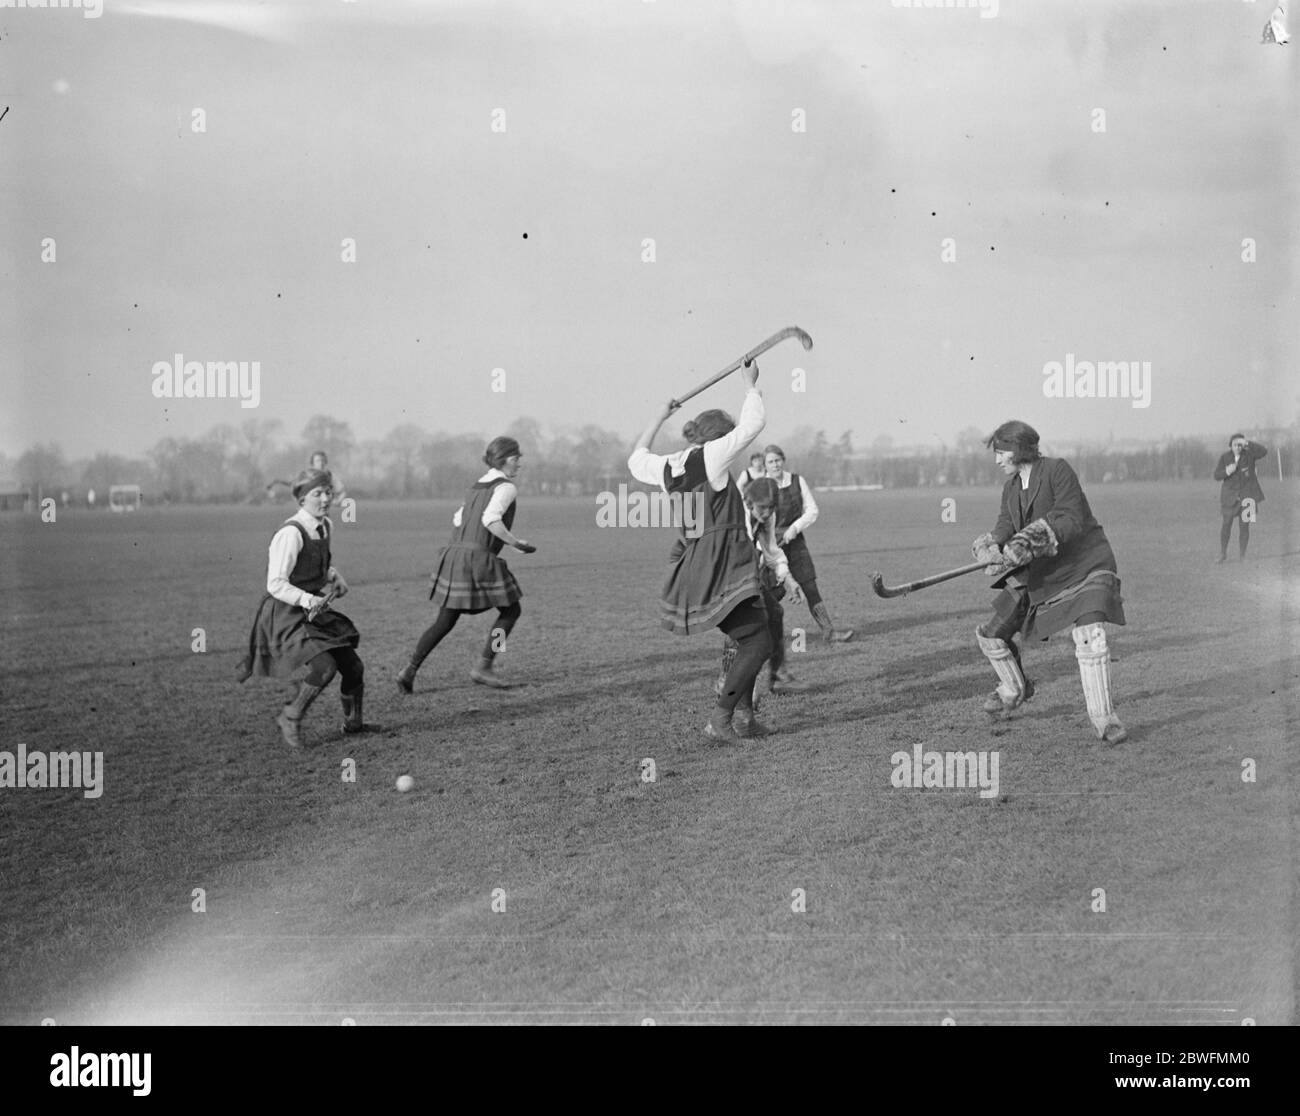 Ladies Hockey at Edmonton The King ' s College hockey team met the London School of Medicine at Edmonton in the semi final of the Inter College Cup A tense moment in front of the King ' s College goal 16 February 1924 Stock Photo